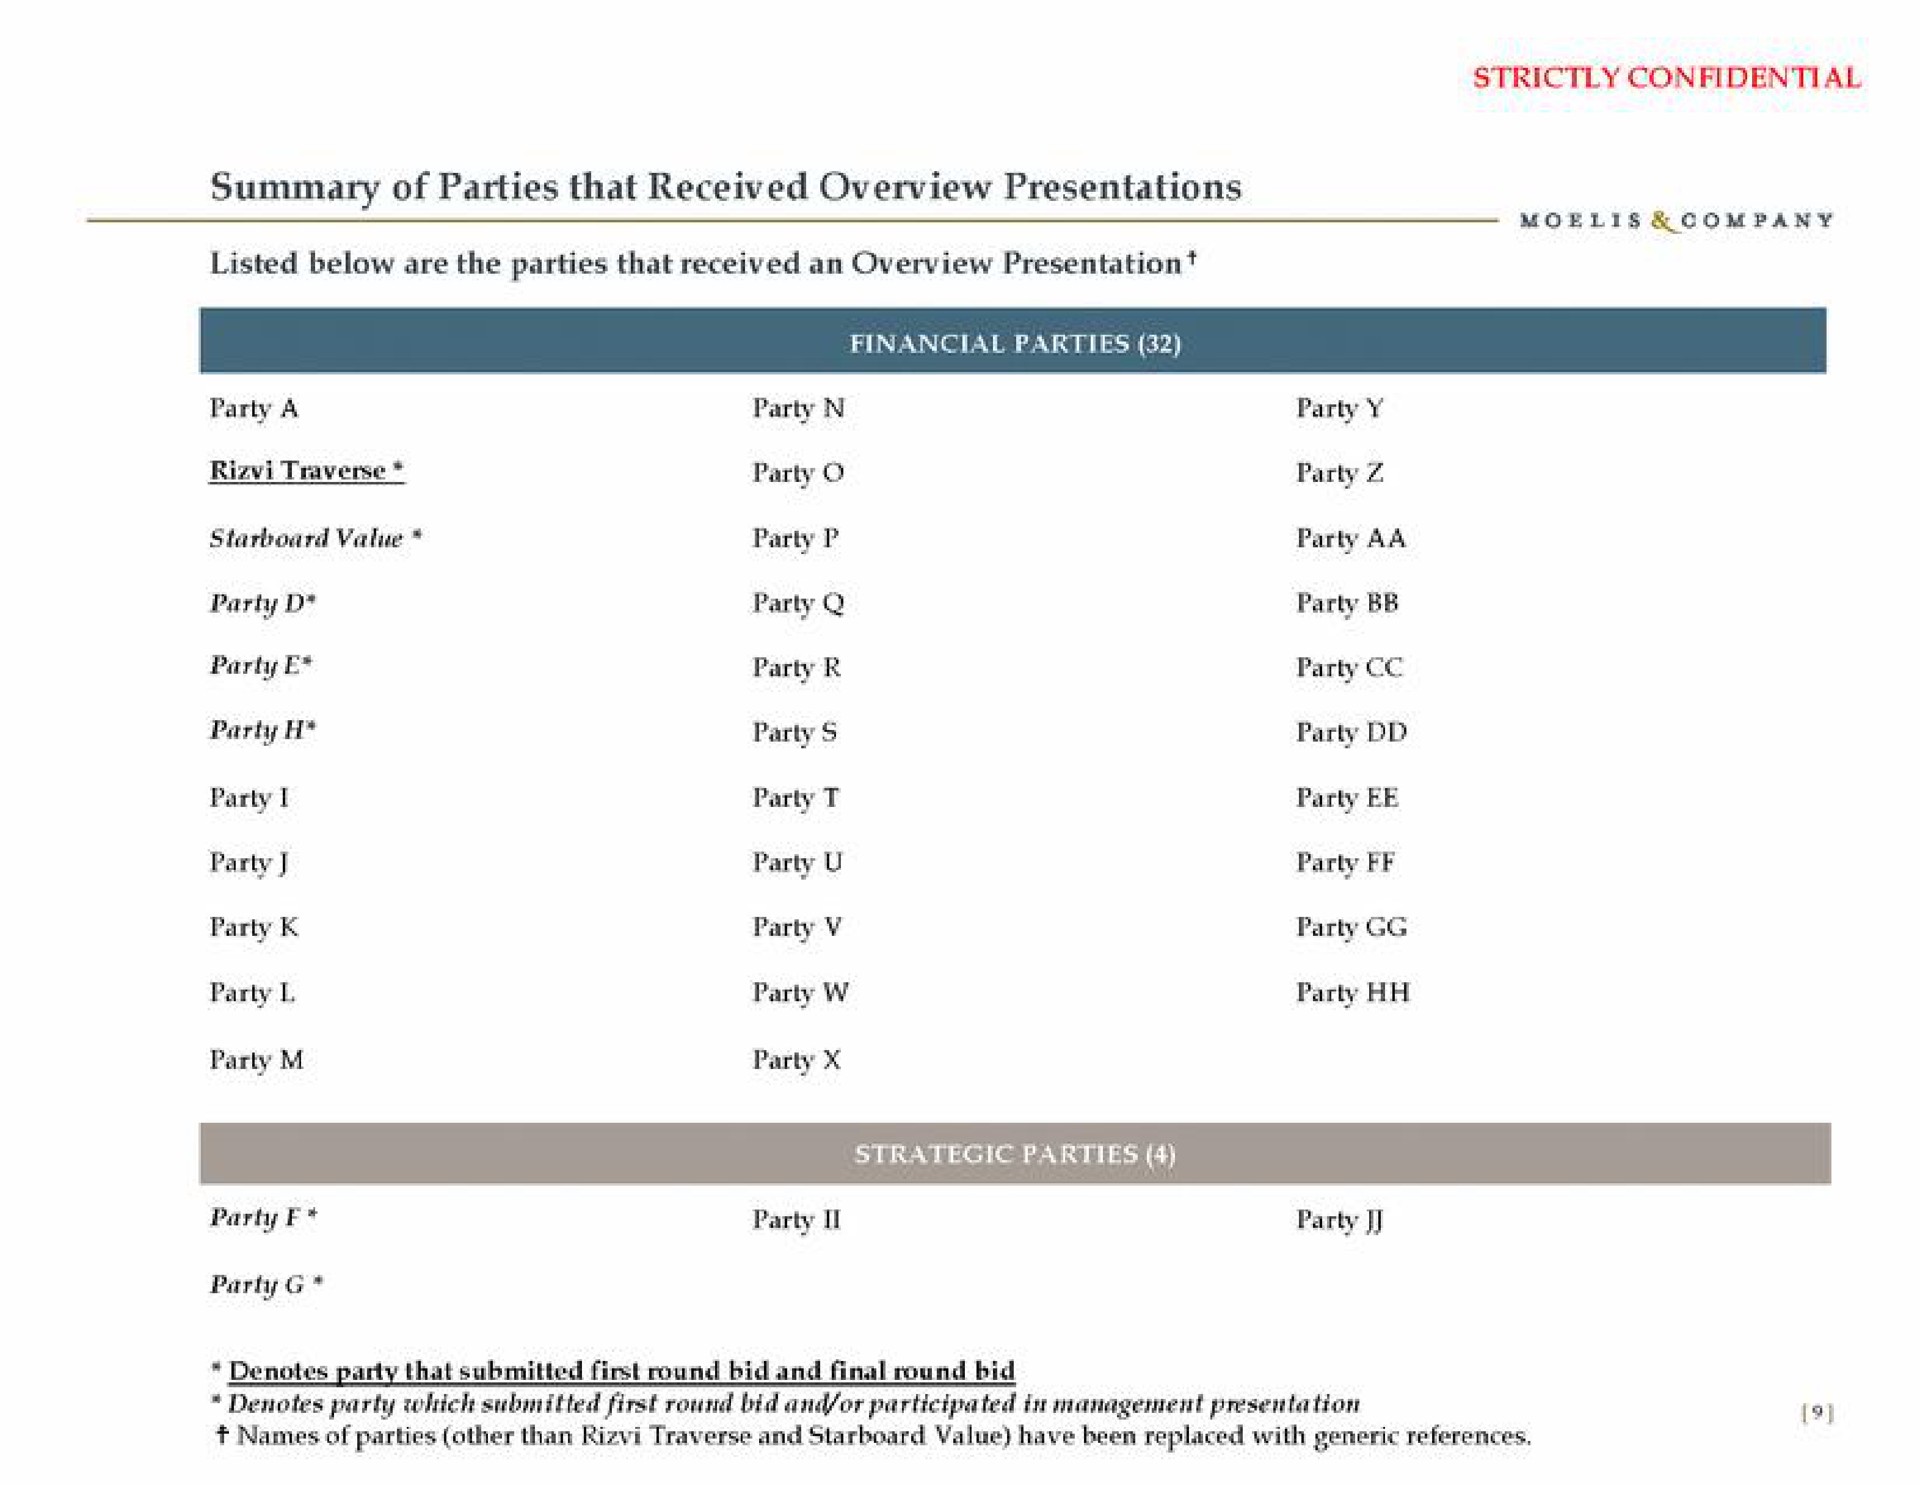 summary of parties that received overview presentations | Moelis & Company